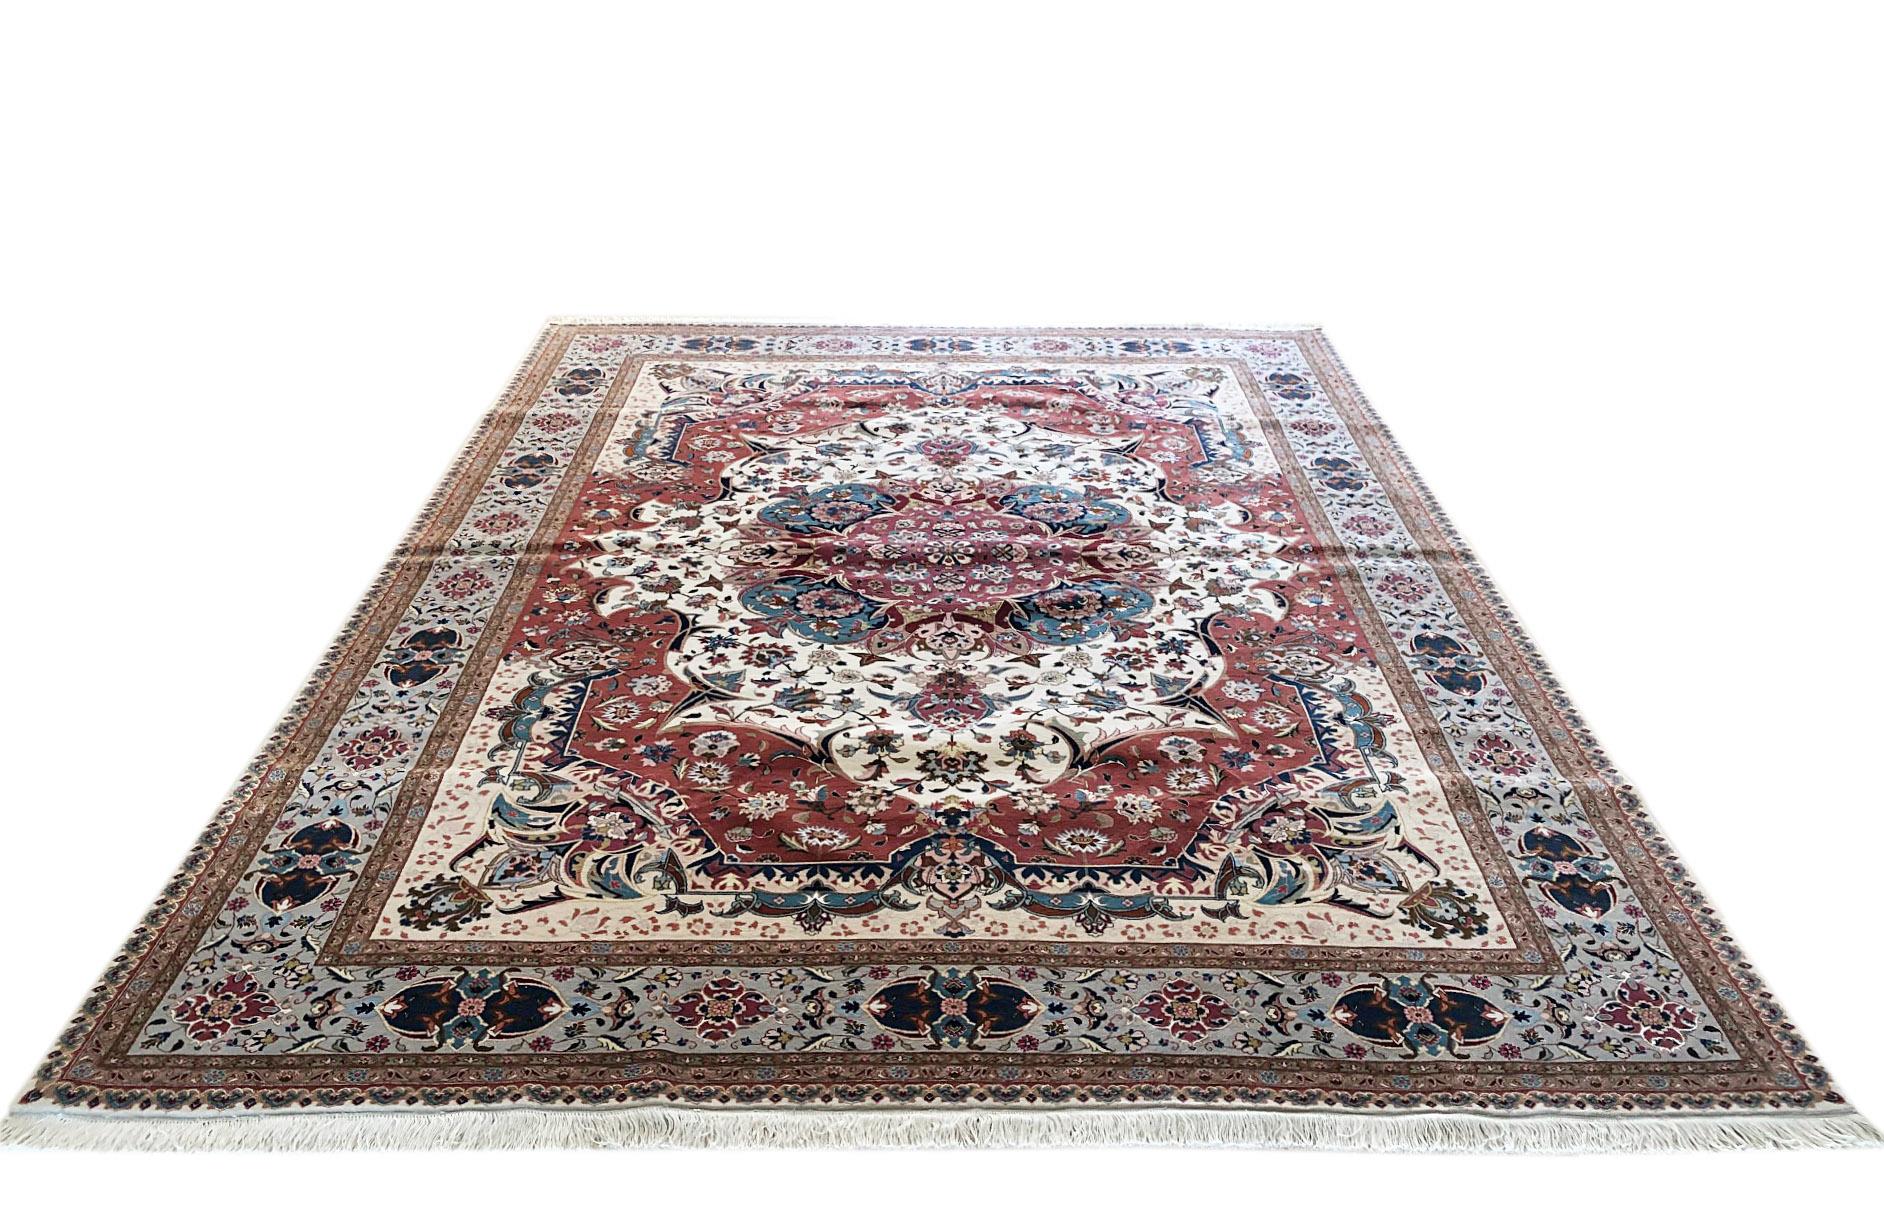 This piece is a hand knotted Persian Tabriz rug with semi-floral design (Emad Design). The pile is wool and silk with cotton foundation. The size is 8 feet 3 inches wide by feet 11 feet 5 inches tall. The base color is cream and the border is blue.